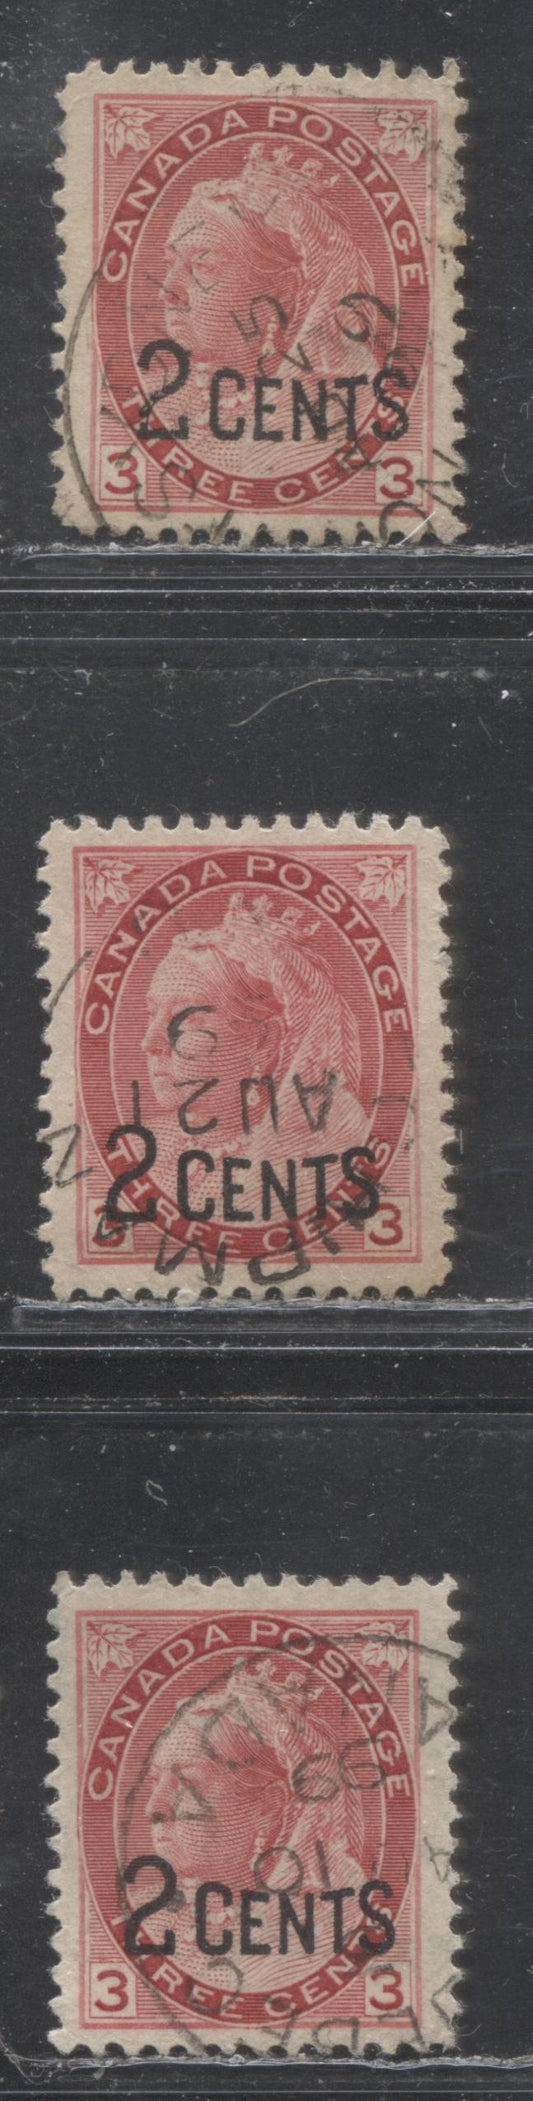 Lot 190 Canada #88 2c on 3c Deep Carmine Rose Queen Victoria, 1899 Provisional Issue, Three VF CDS Used Examples, Each With Different Towns